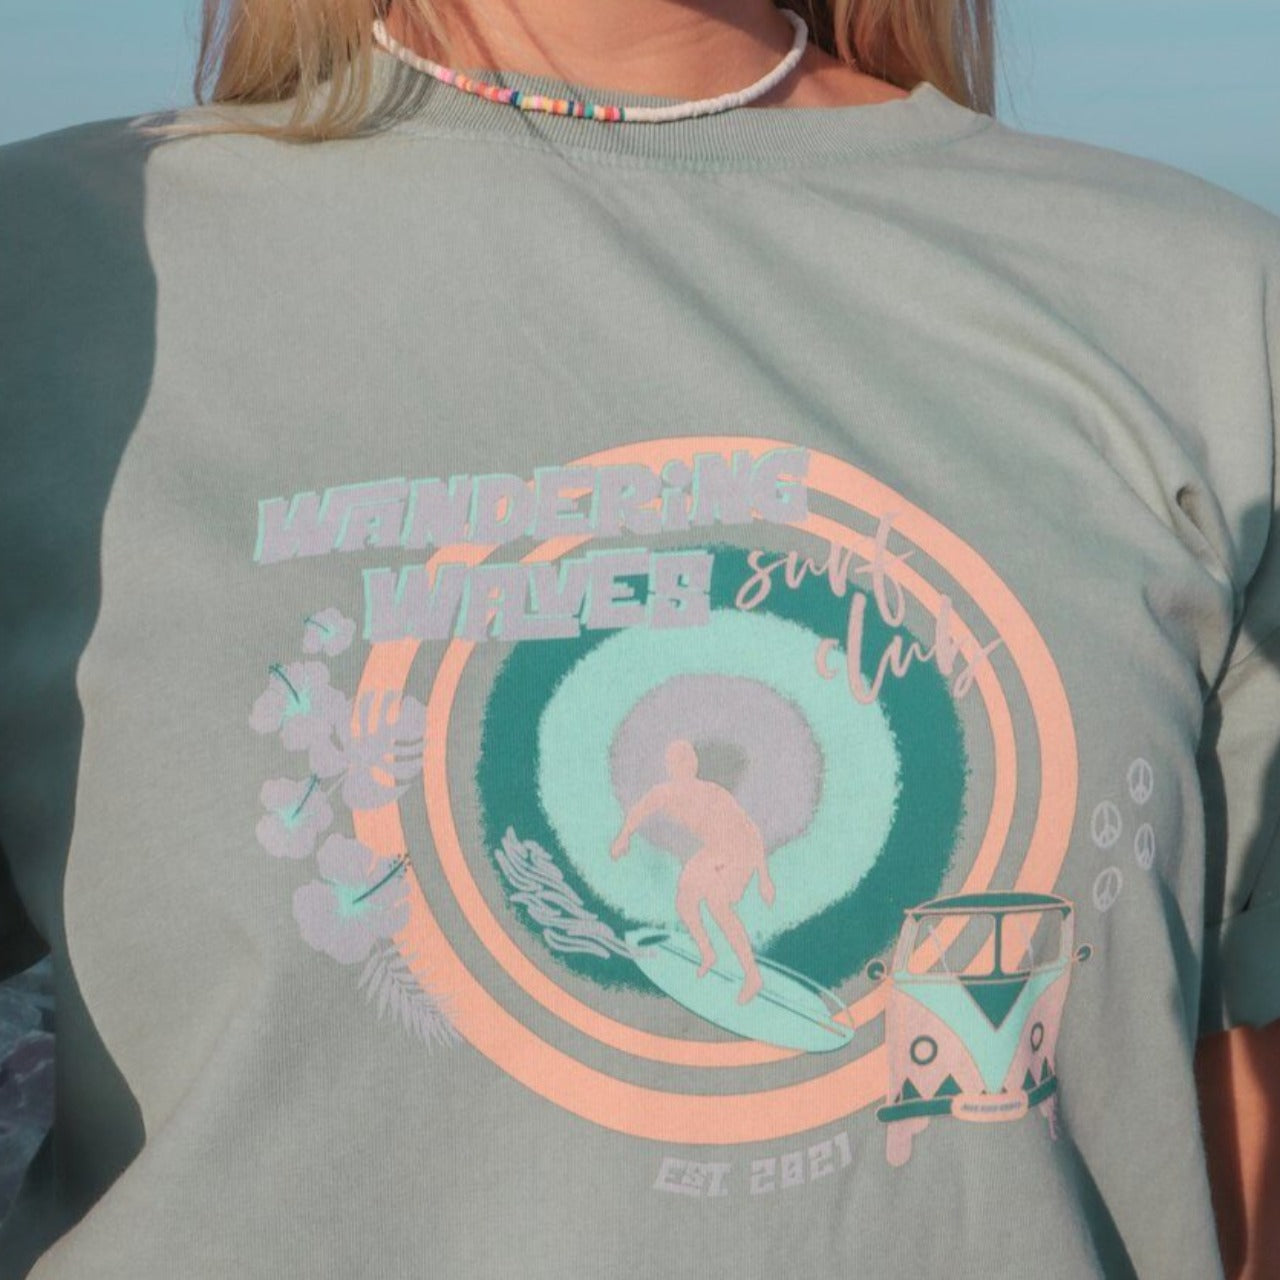 "Surf Club Mantra Tee" by Wandering Waves Surf Company designed by Amanda Vick of Moon and Wolf Co.